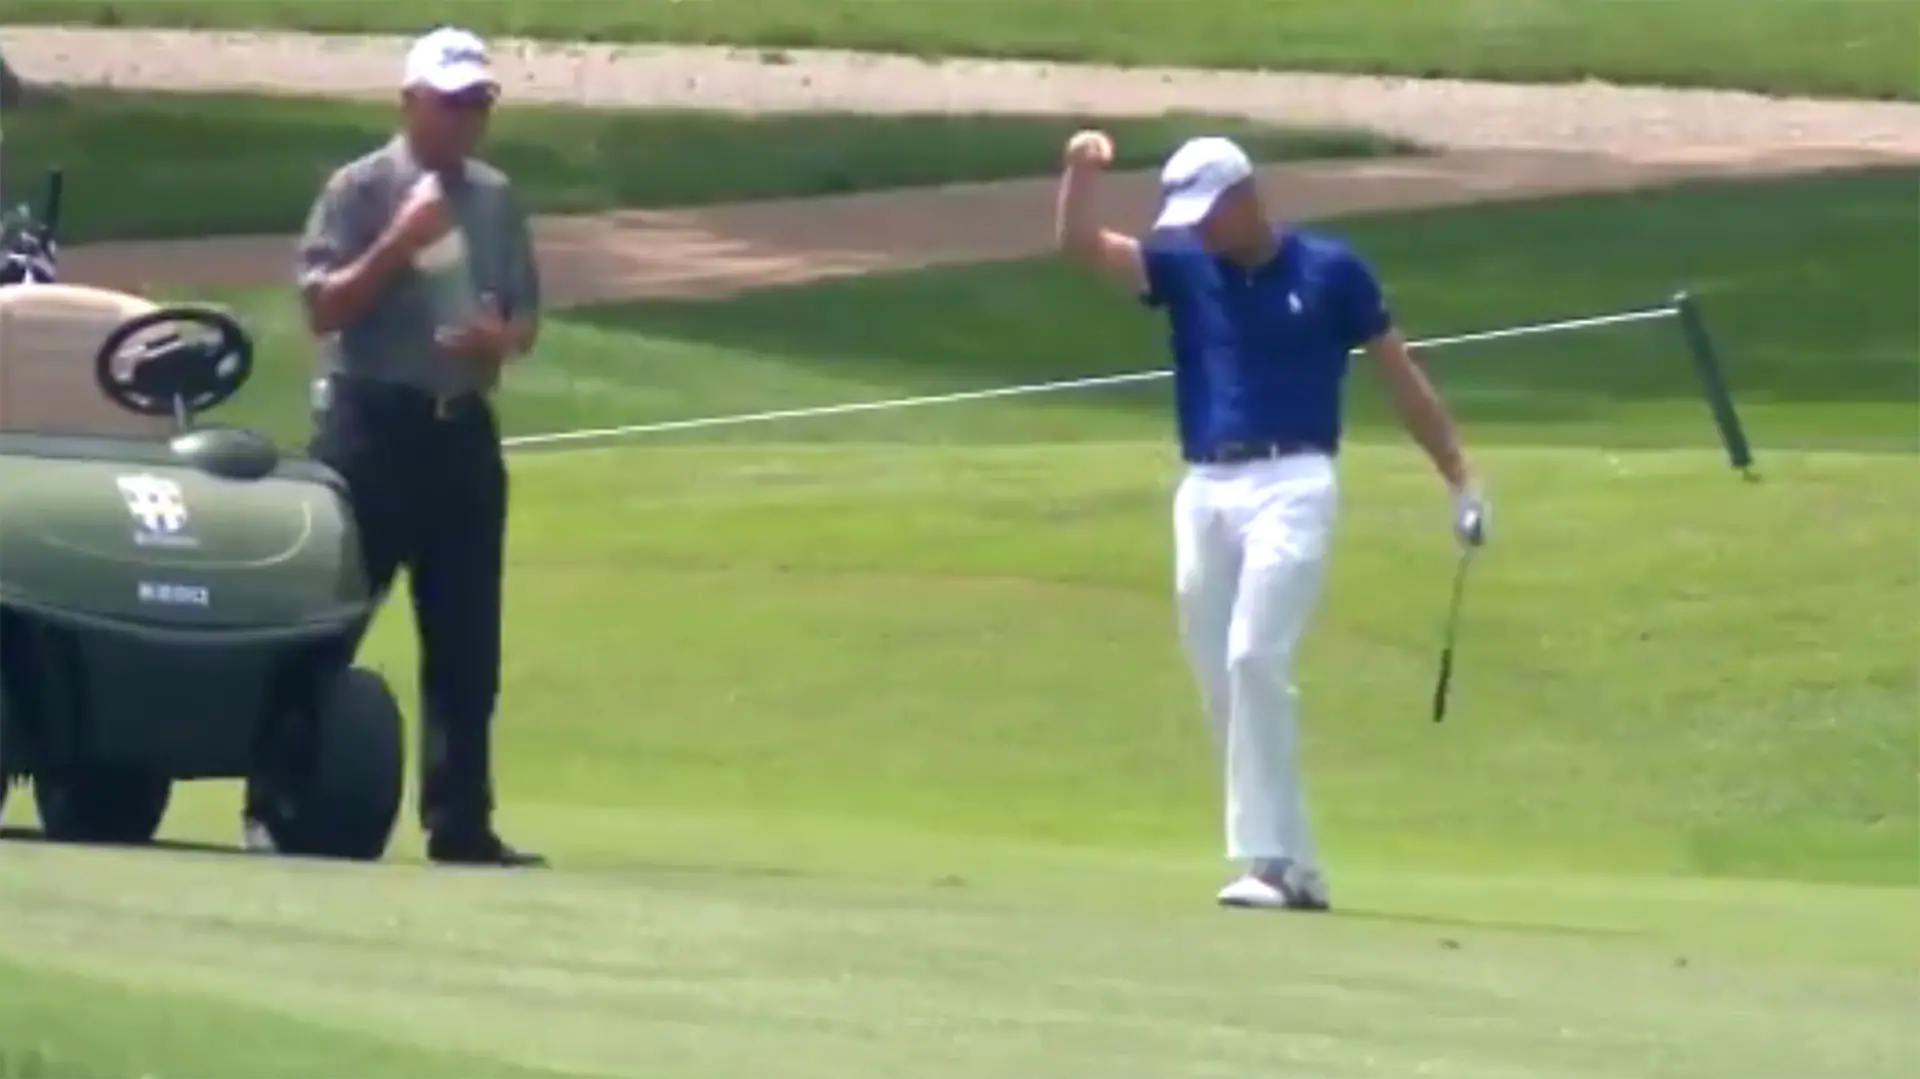 Watch: Thomas holes out in practice round at Bellerive